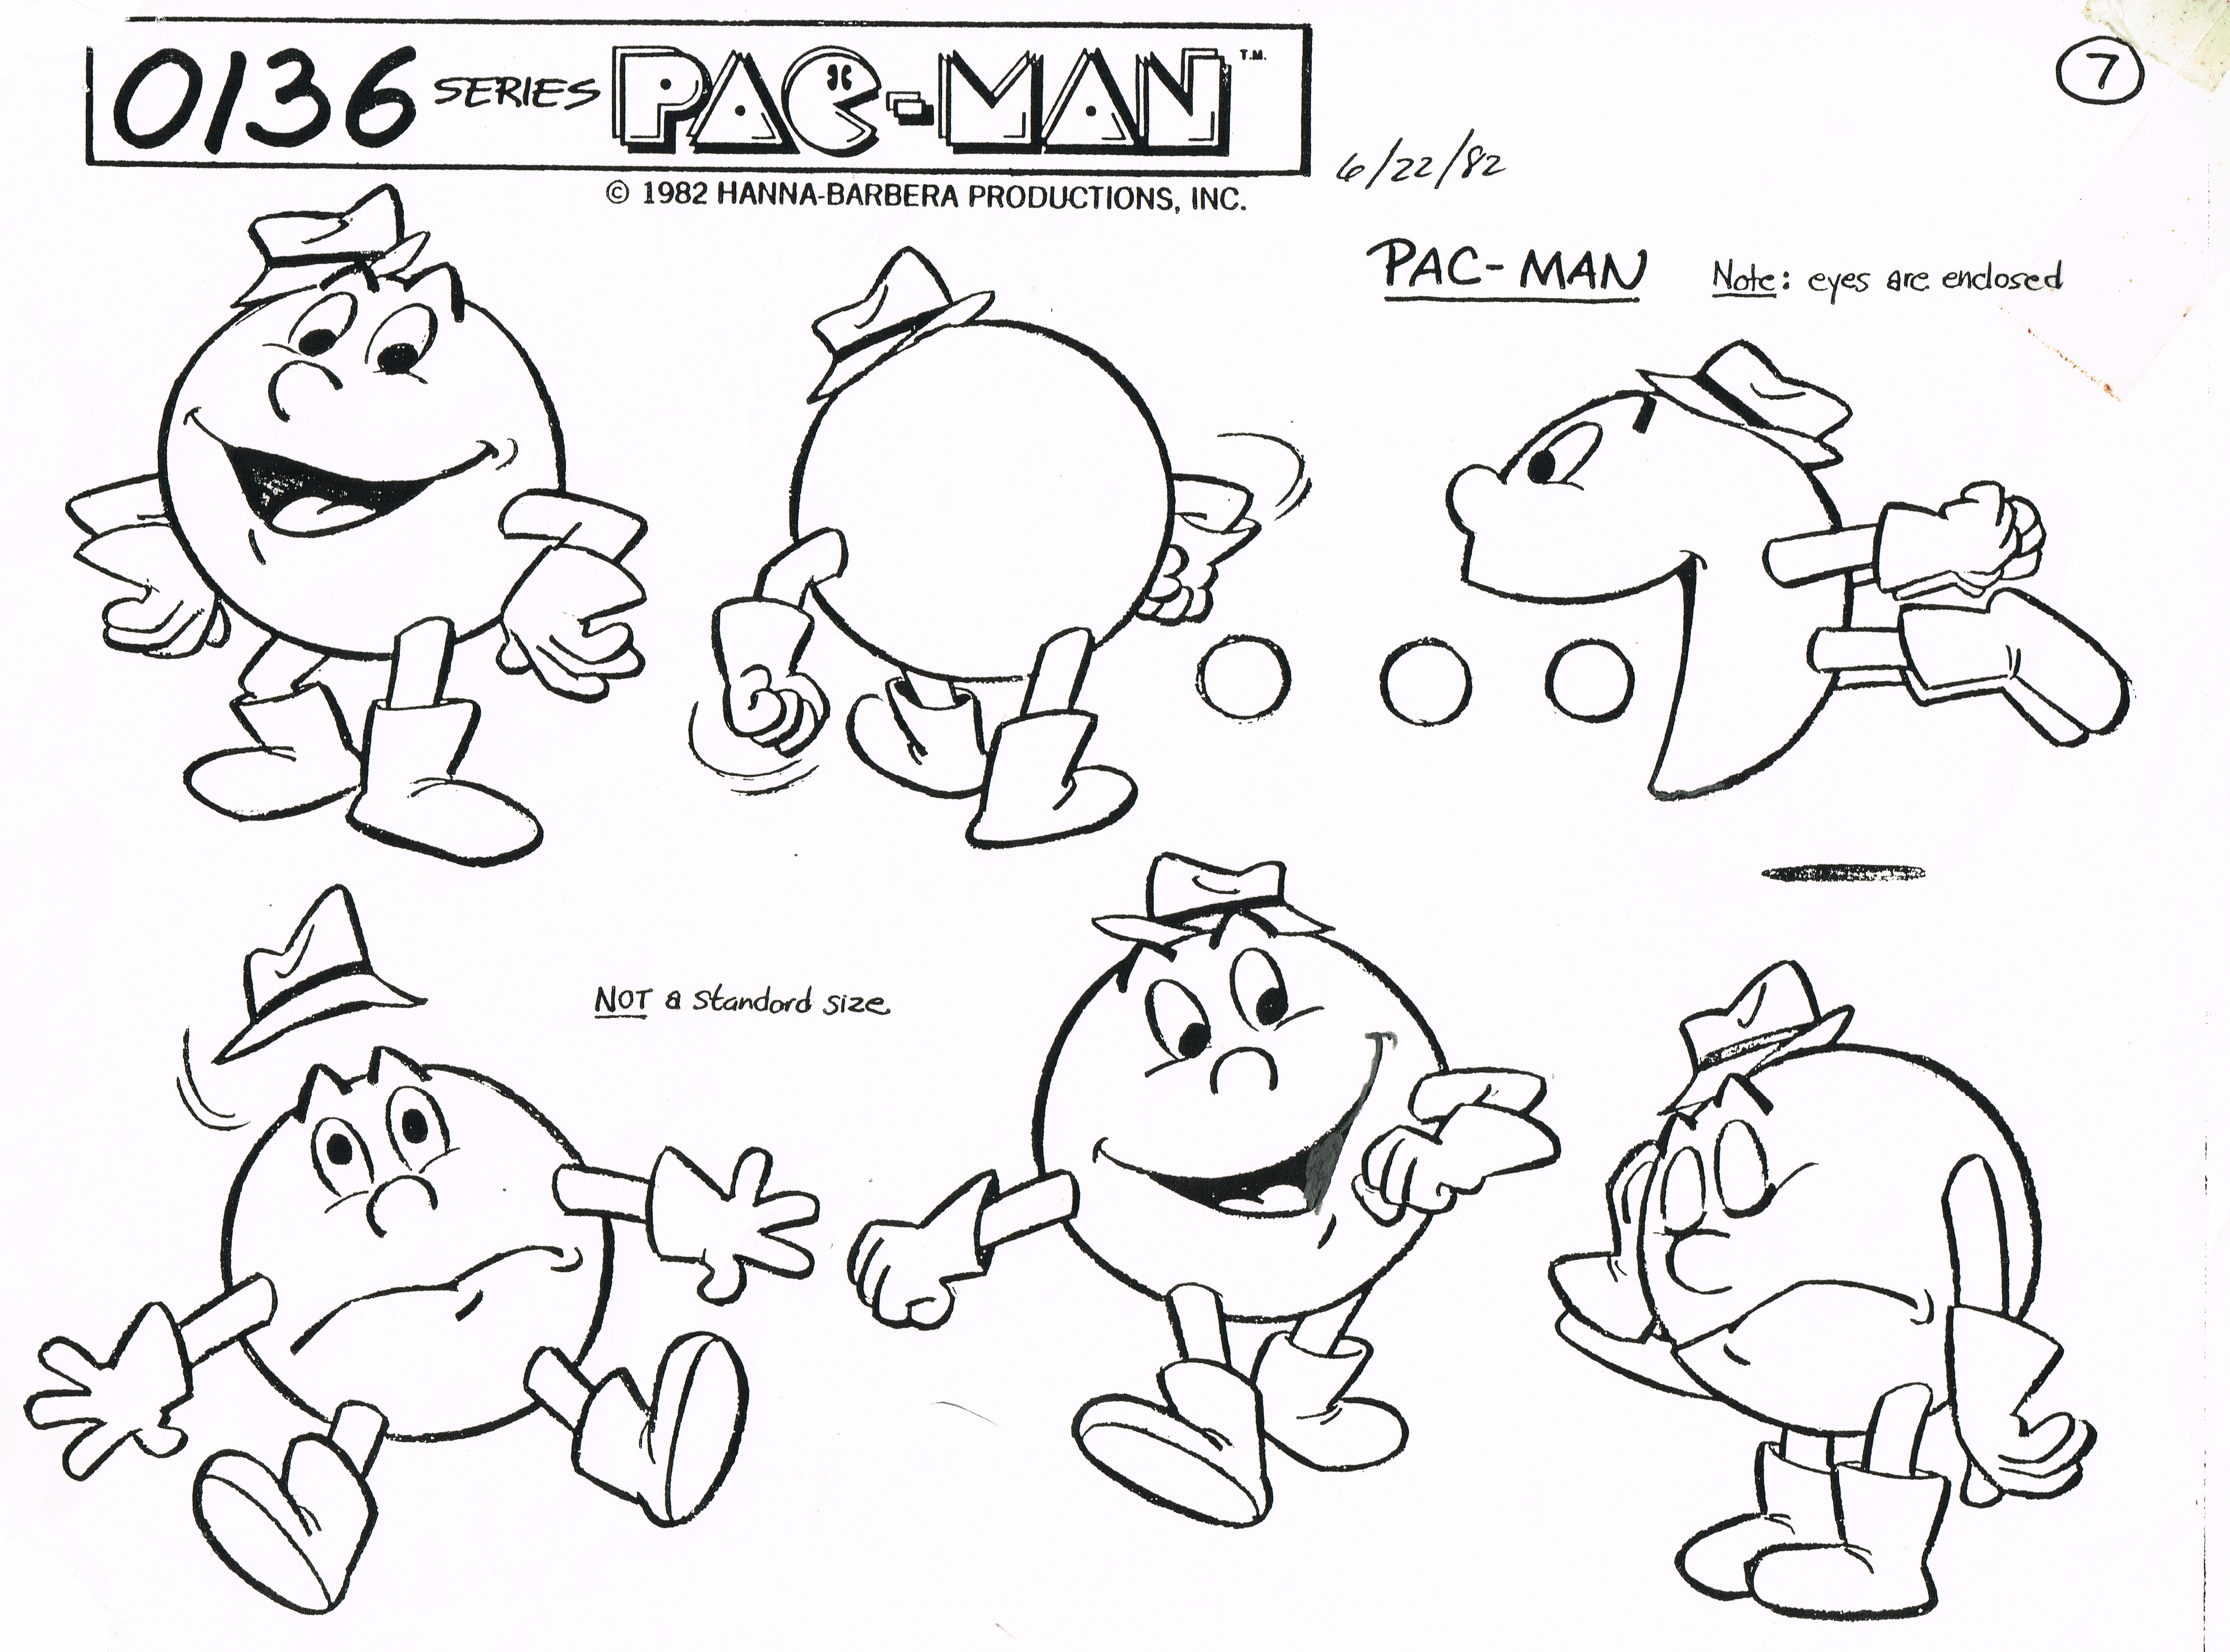 Model sheetsconcept art from the pacman cartoon rpacman